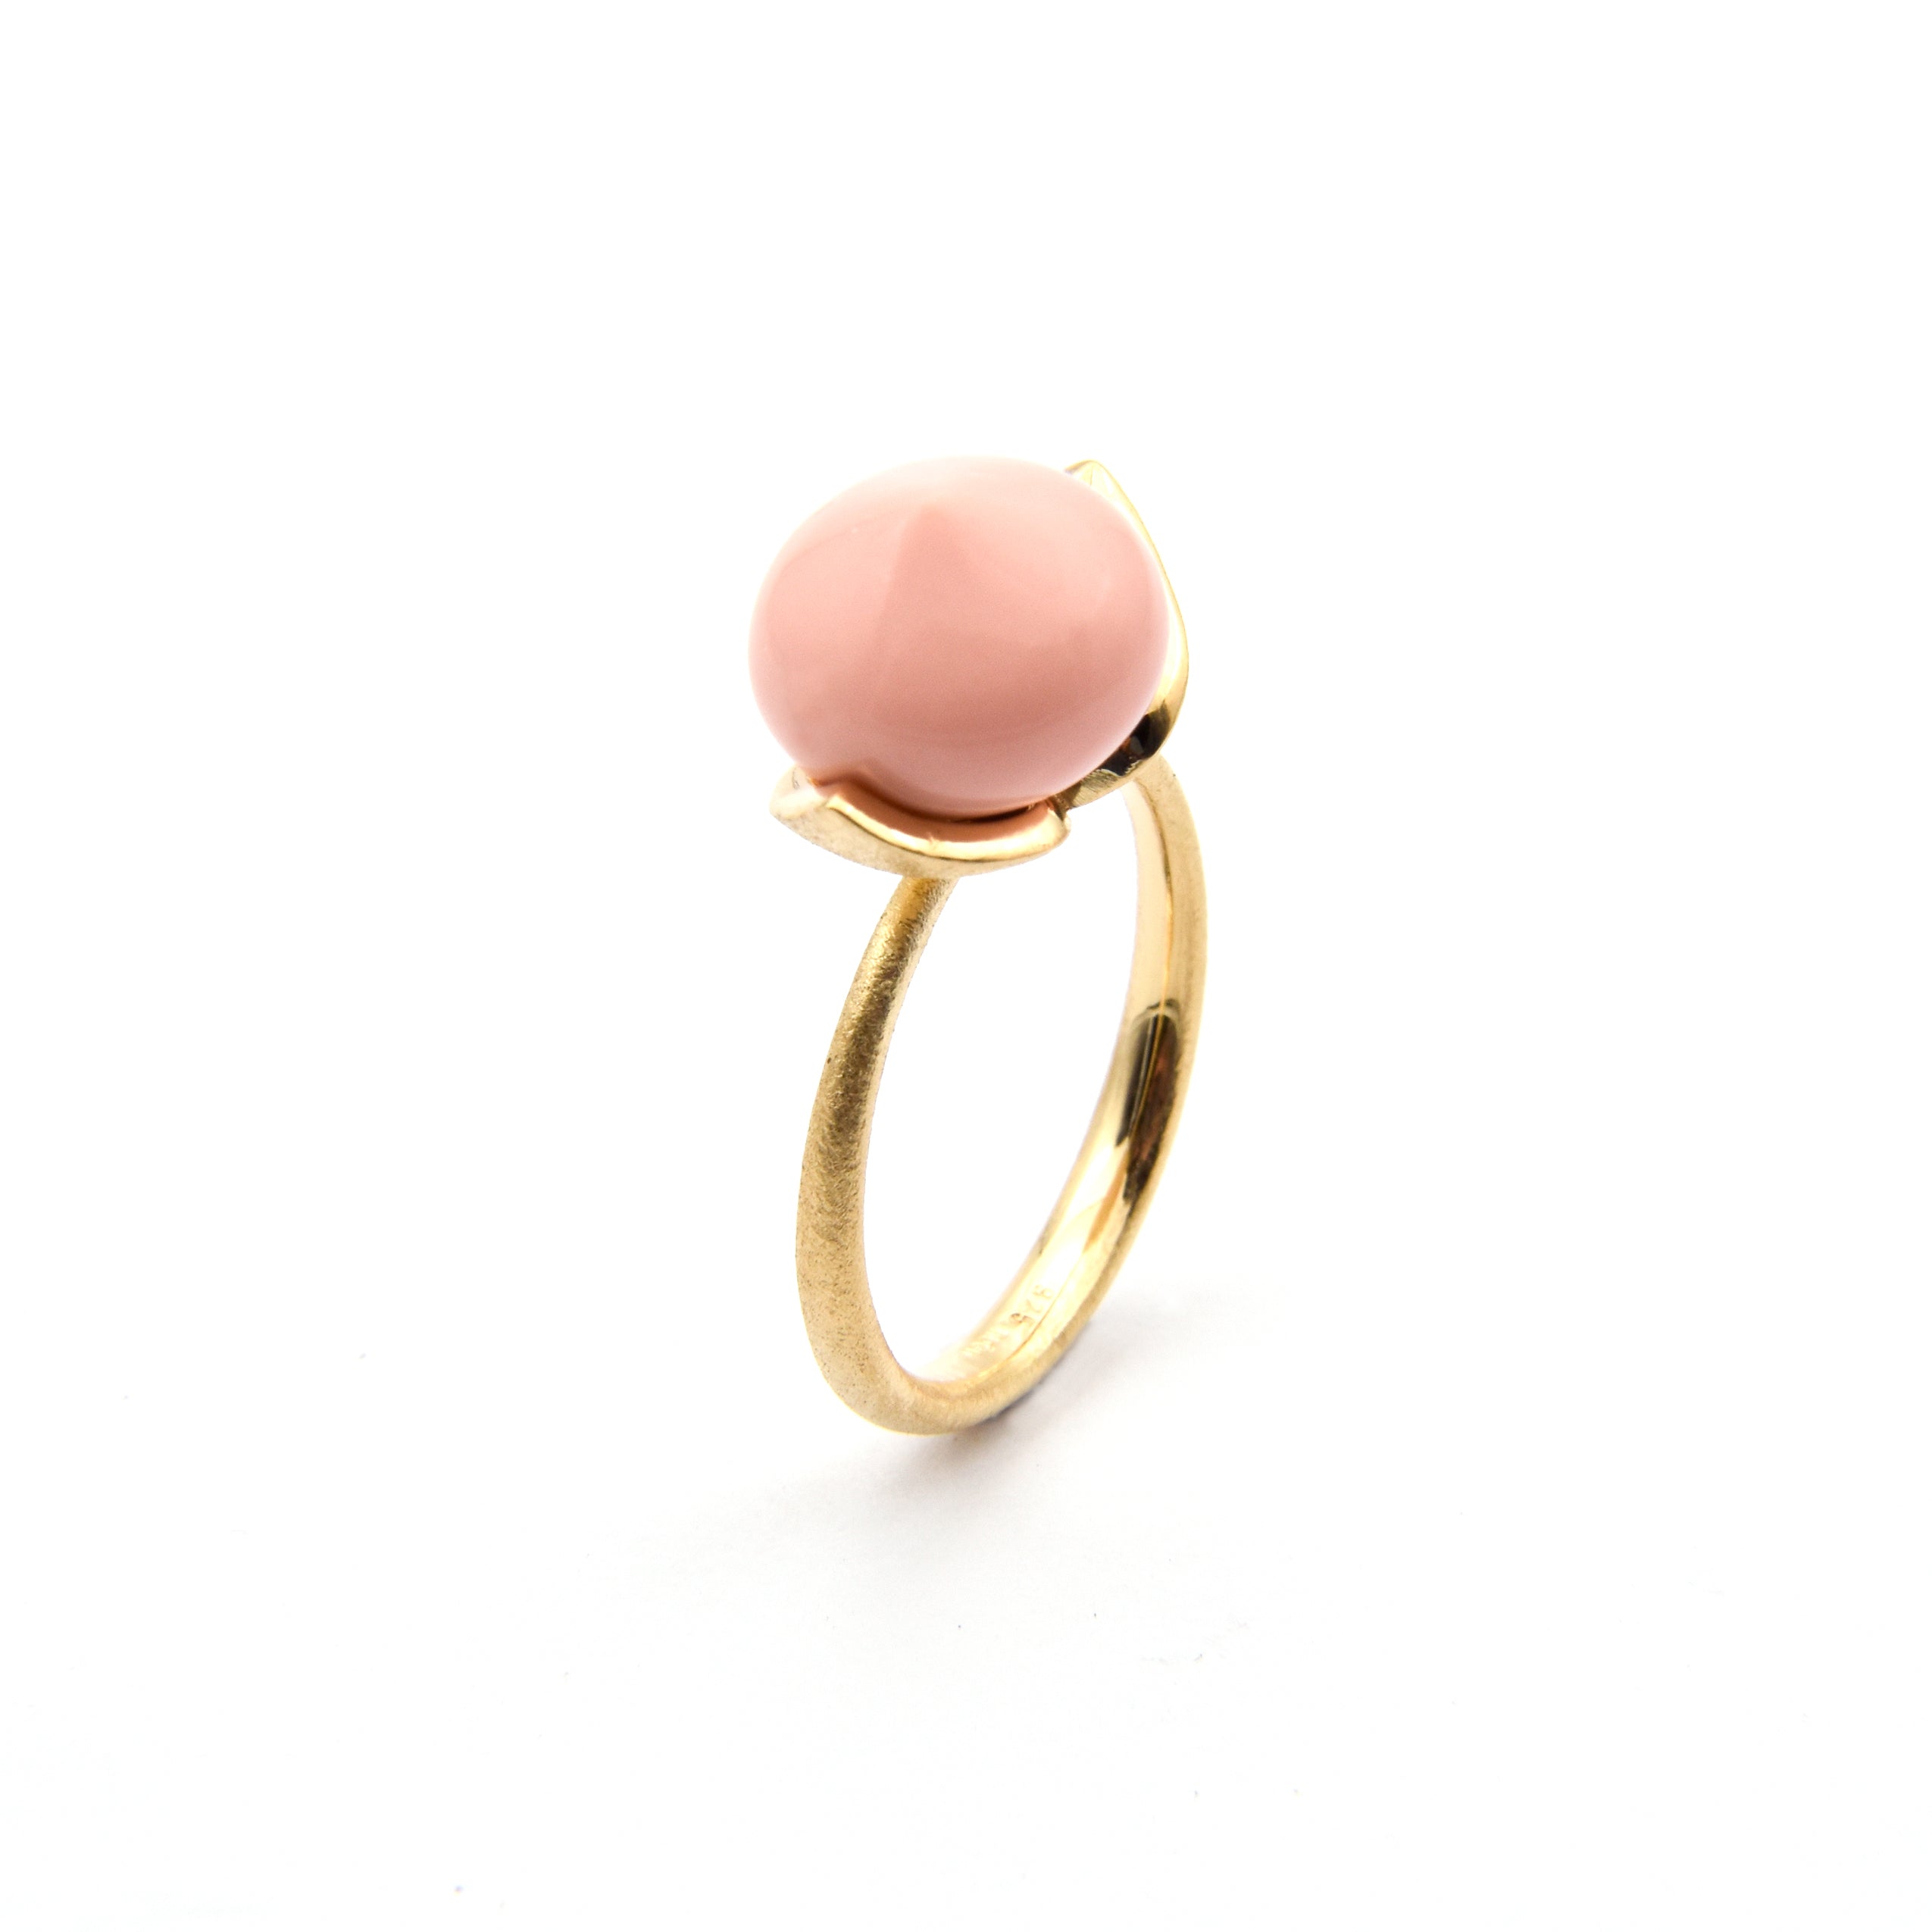 Dolce ring "medium" with coral angel skin rec. 925/-